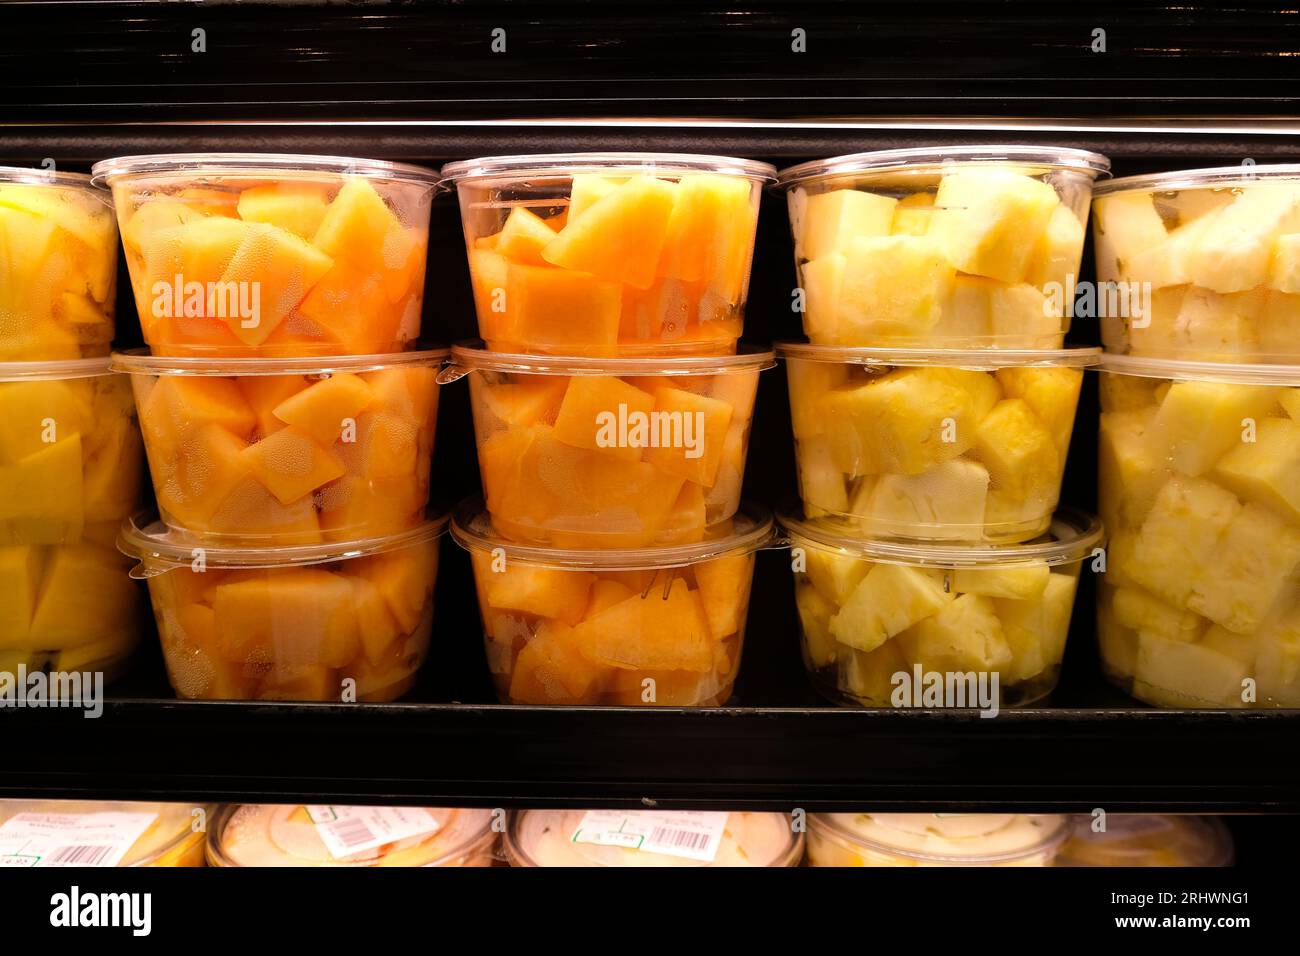 Chopped Fruits Plastic Packaged at Supermarket Stock Photo